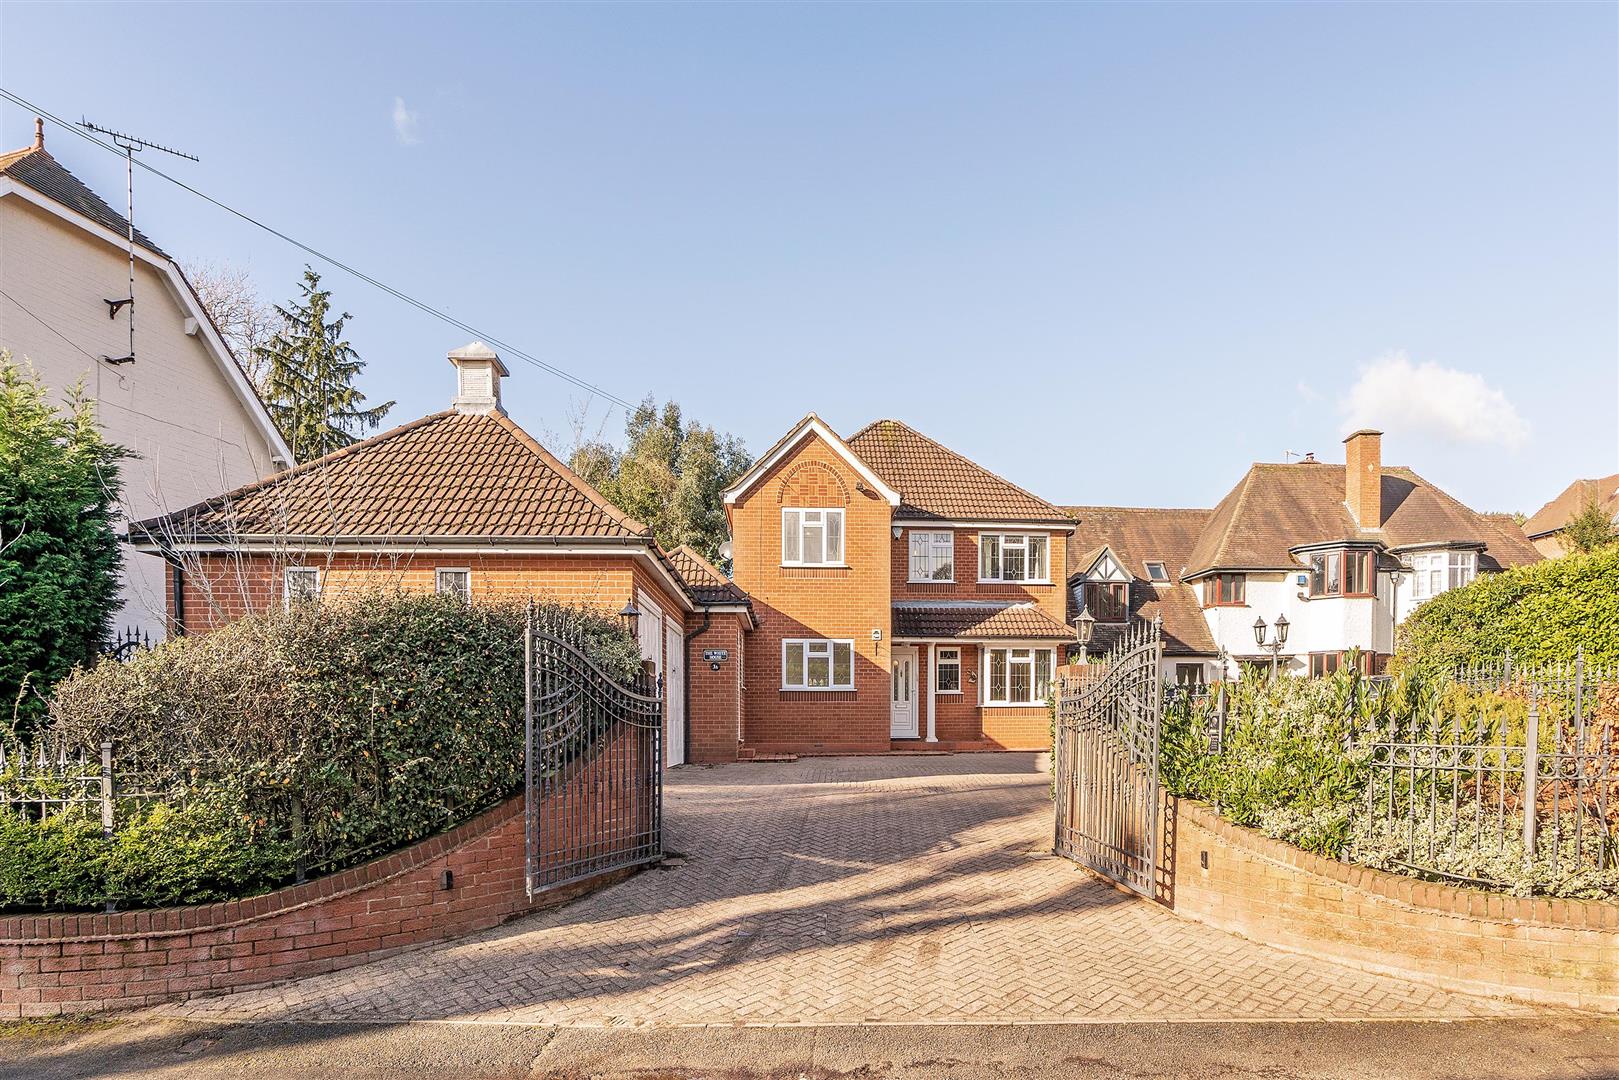 4 bed detached house to rent in Beechnut Lane, Solihull  - Property Image 1